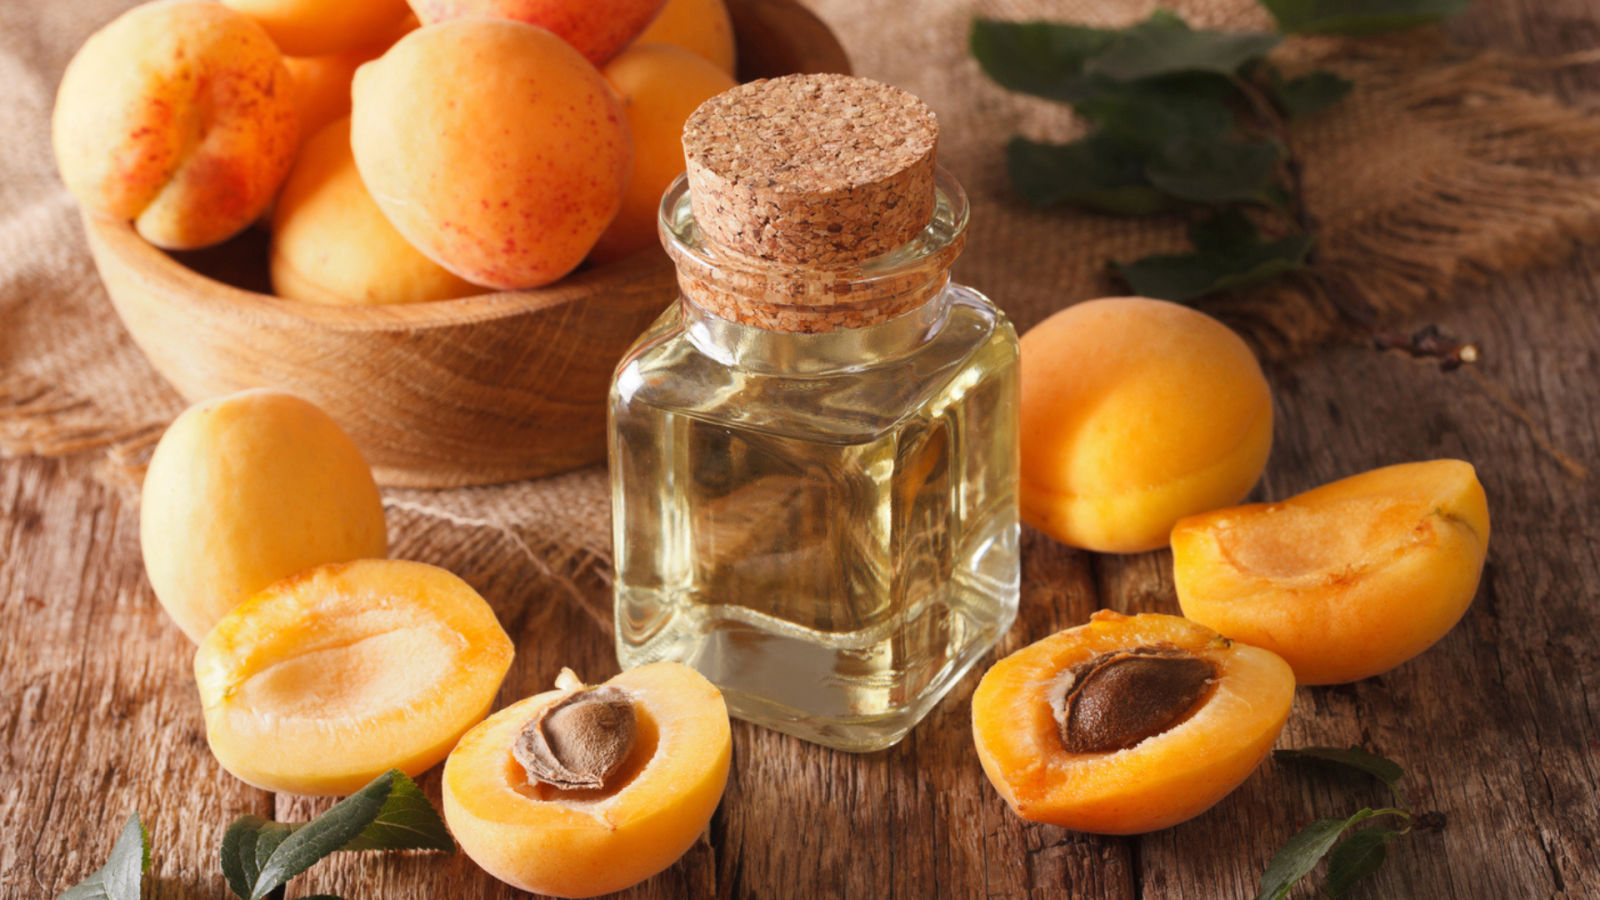 Benefits of Apricot Oil as a Moisturizer: 1. Hydrates and softens the